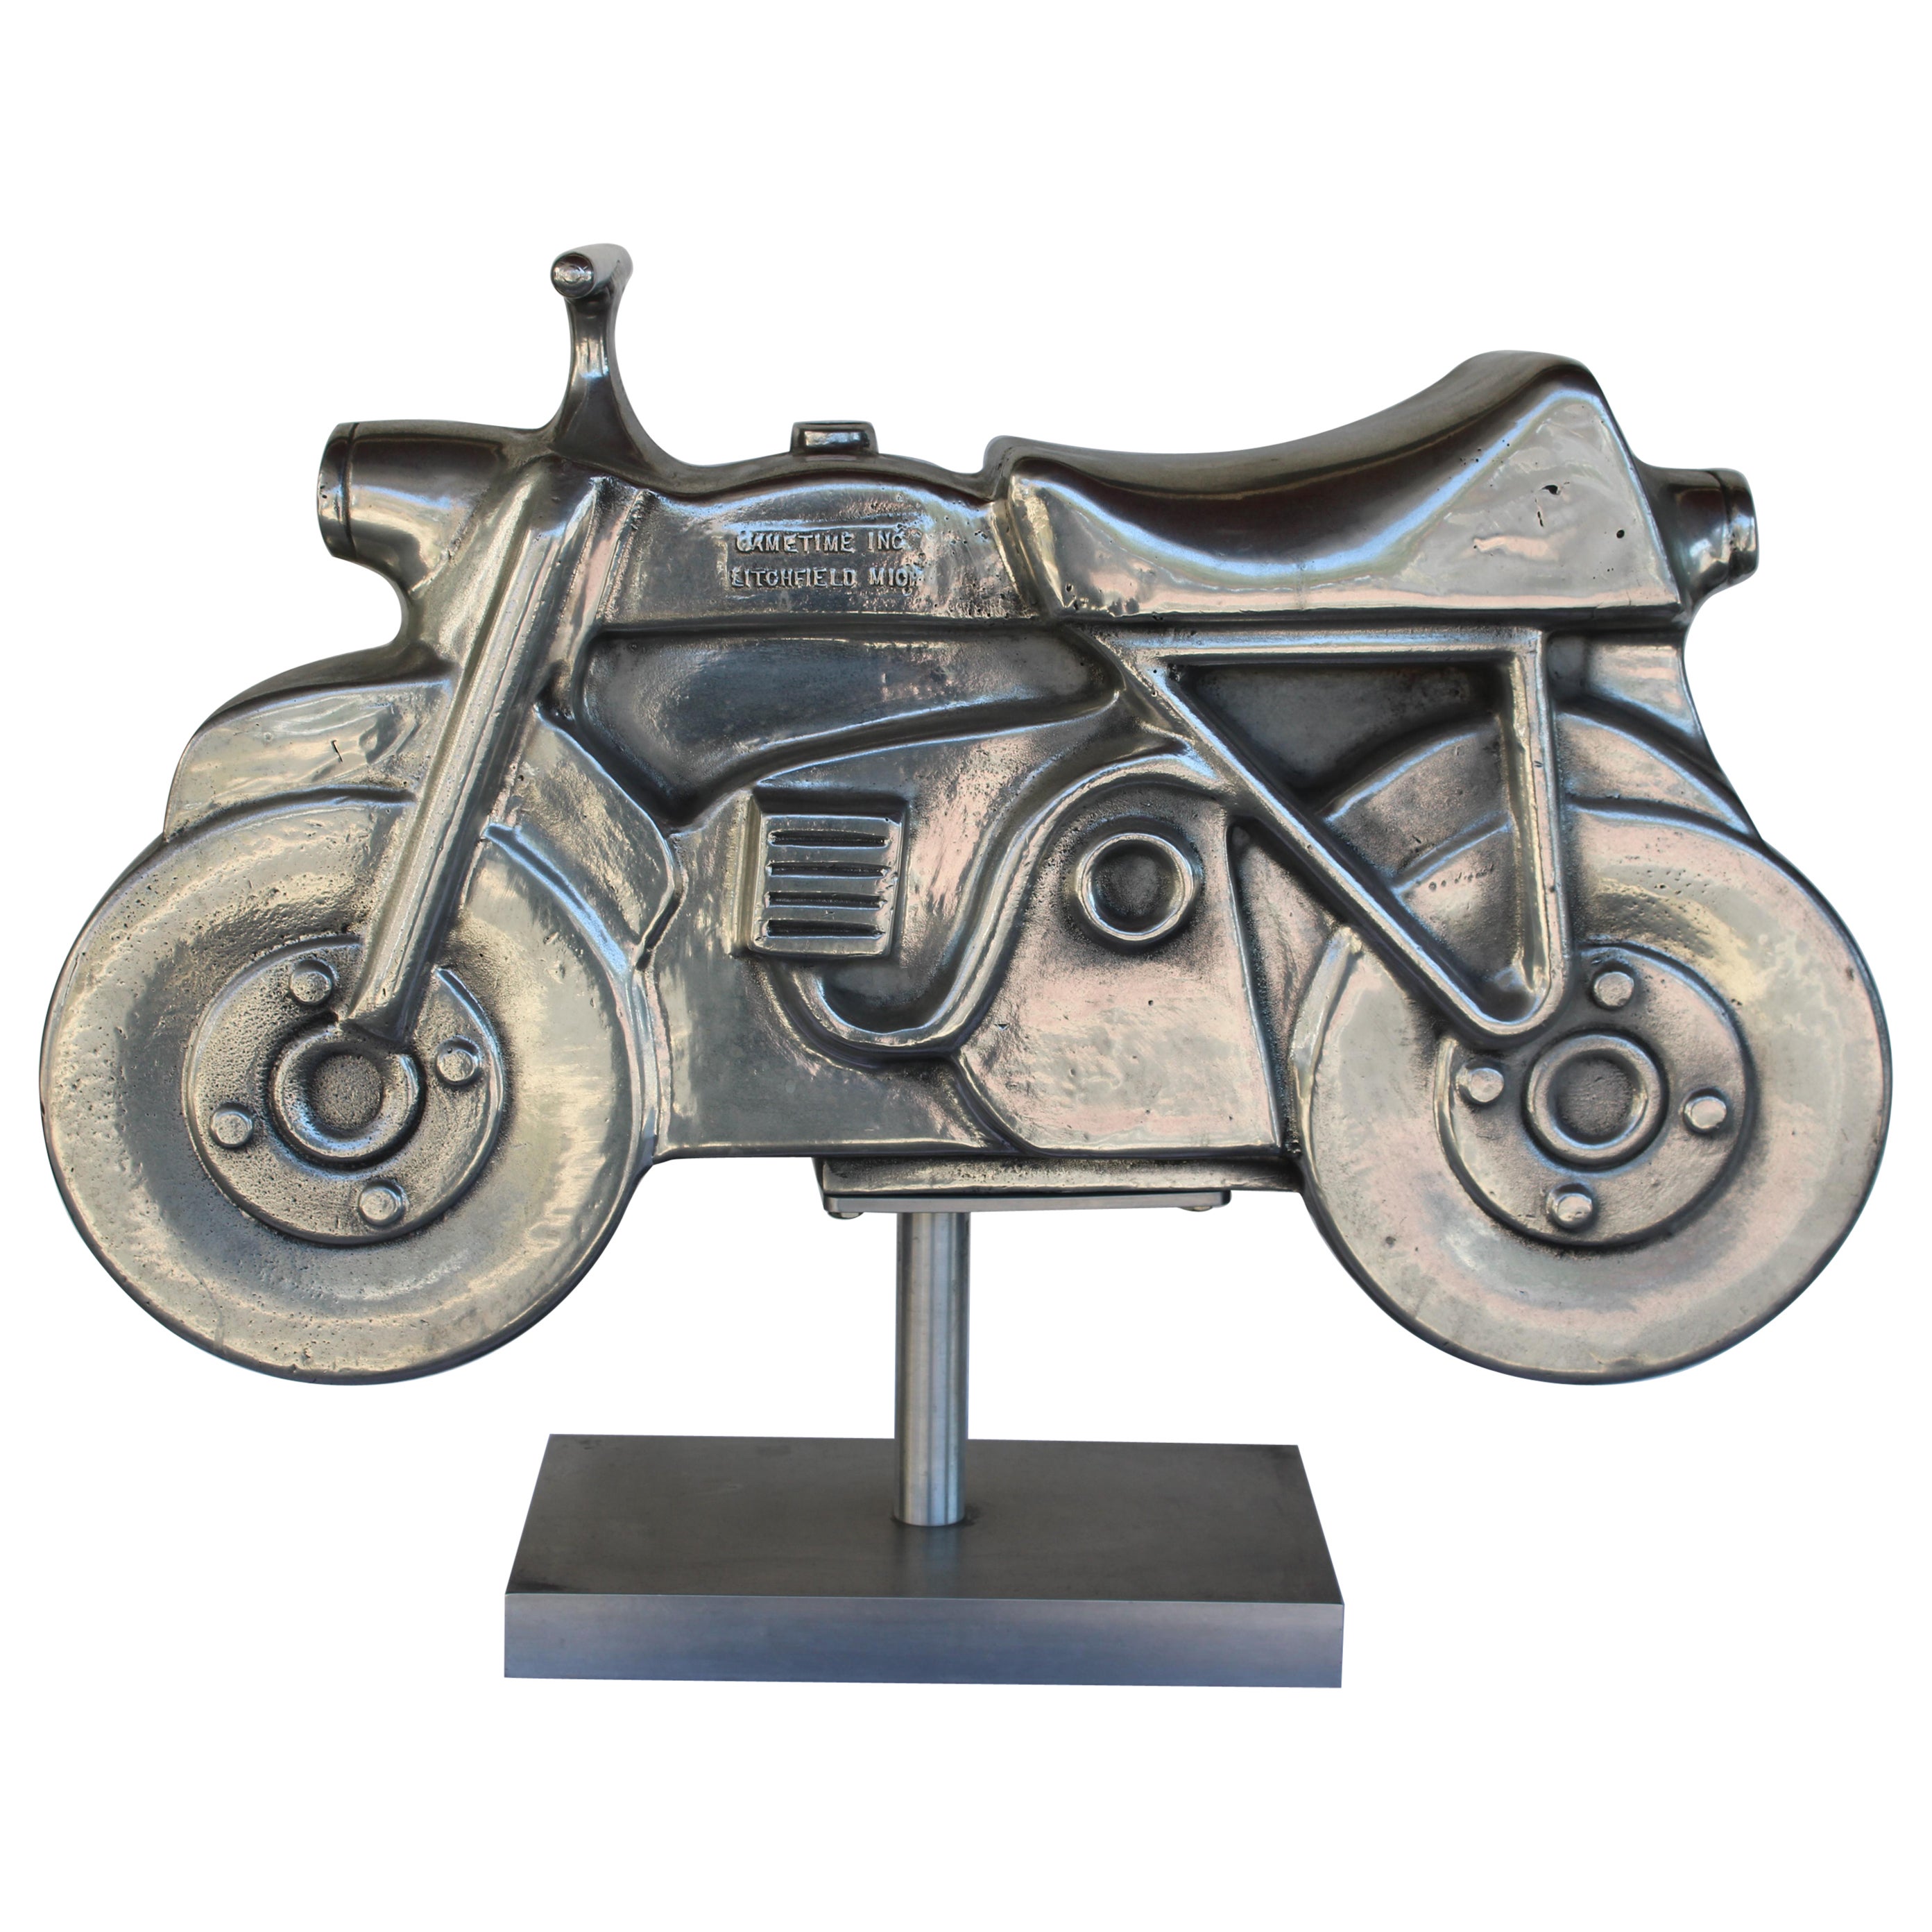 Aluminum Motorcycle Playground Toy Sculpture on Stand